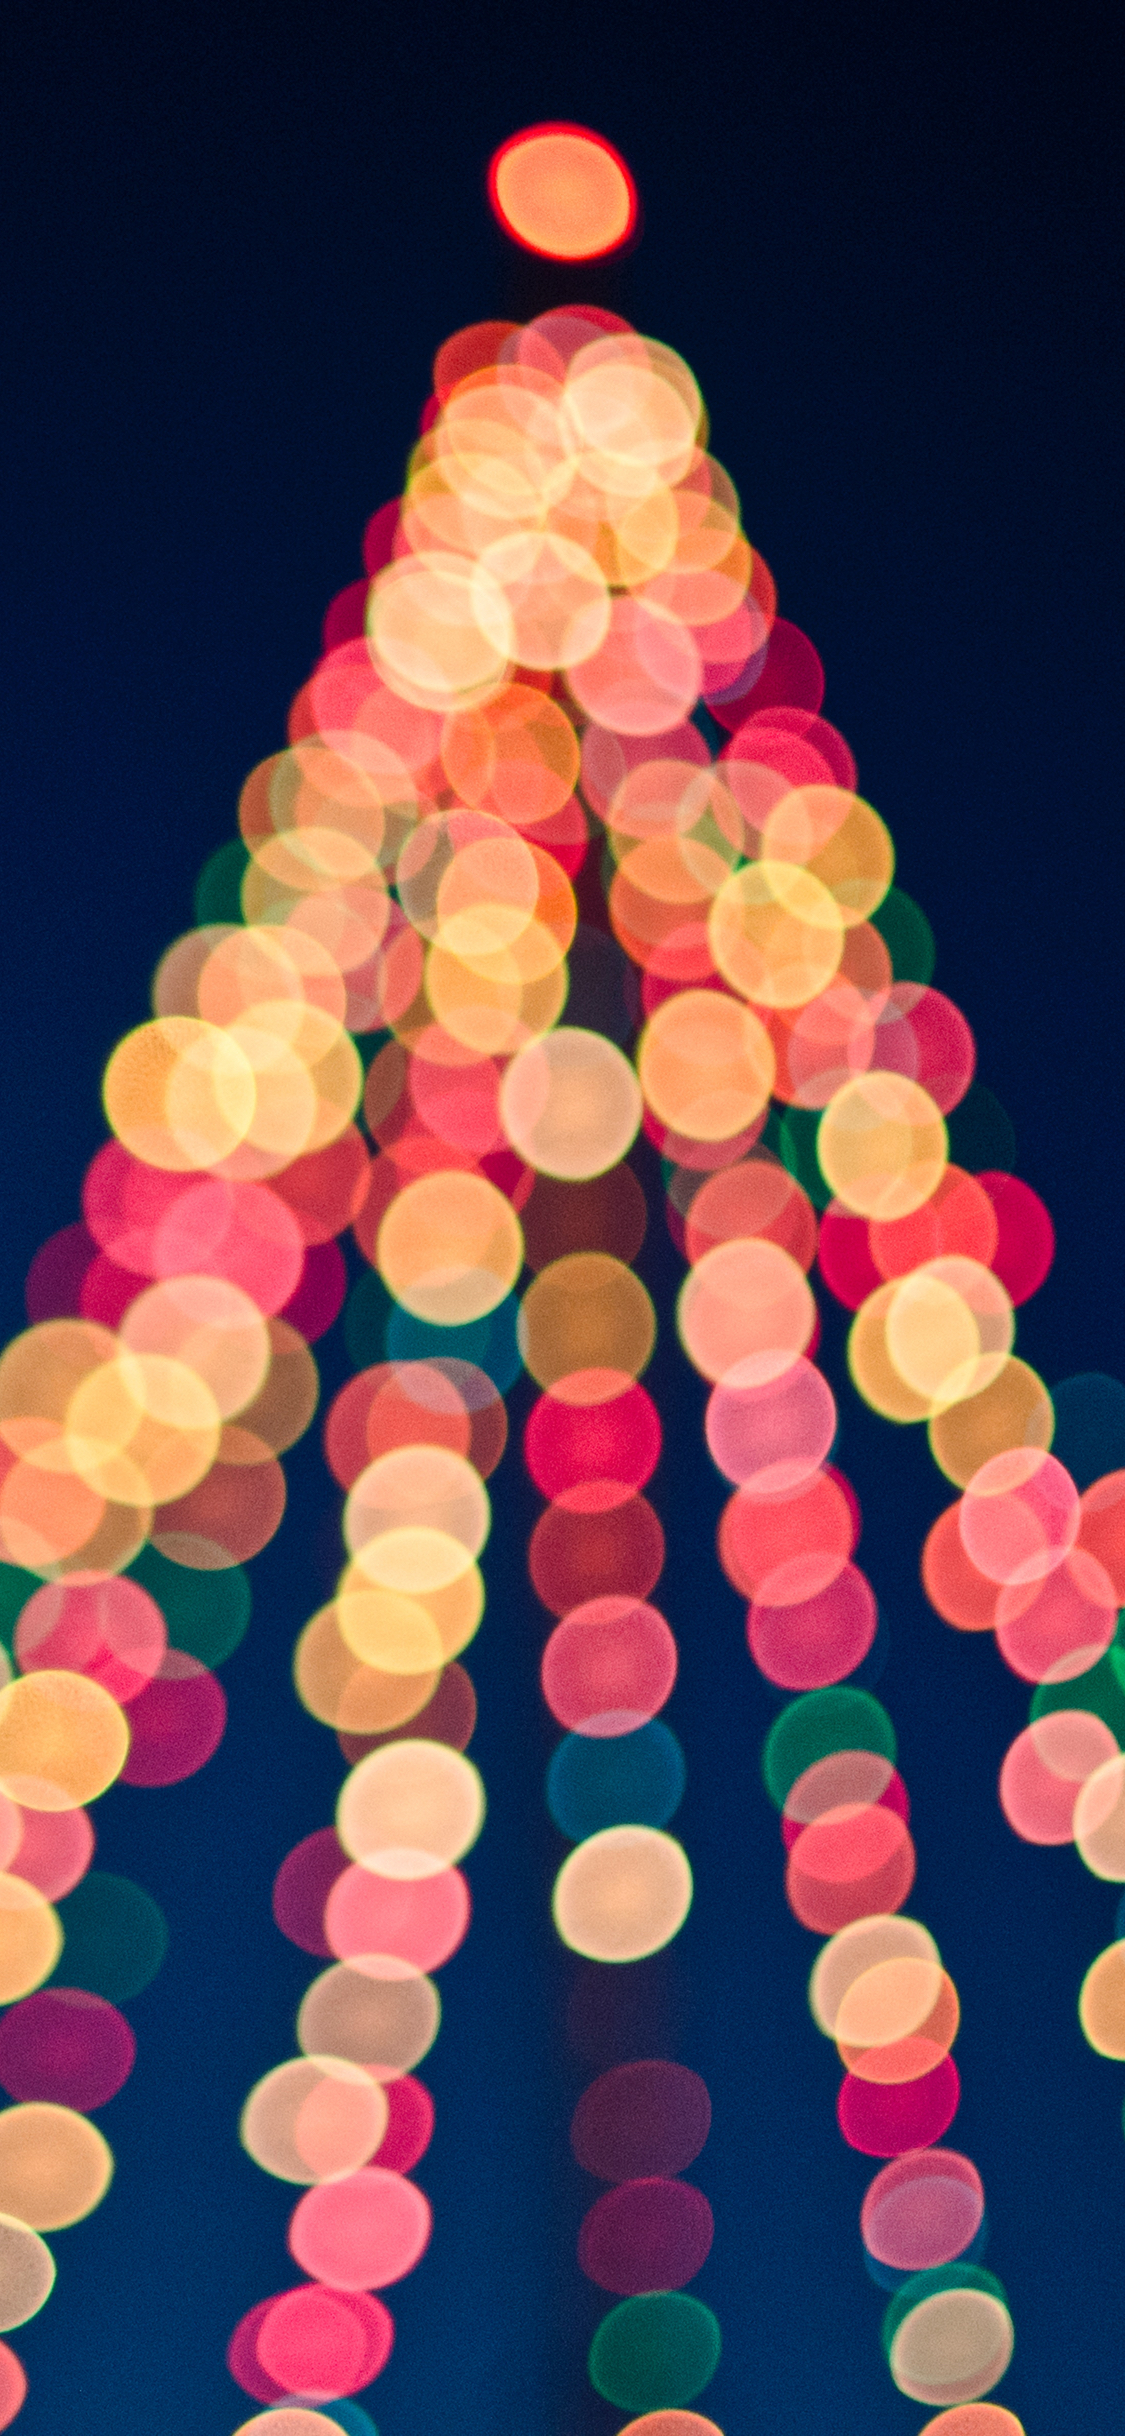 Holiday Lights For Mac, Iphone, Iphone X, Ipad, And - HD Wallpaper 